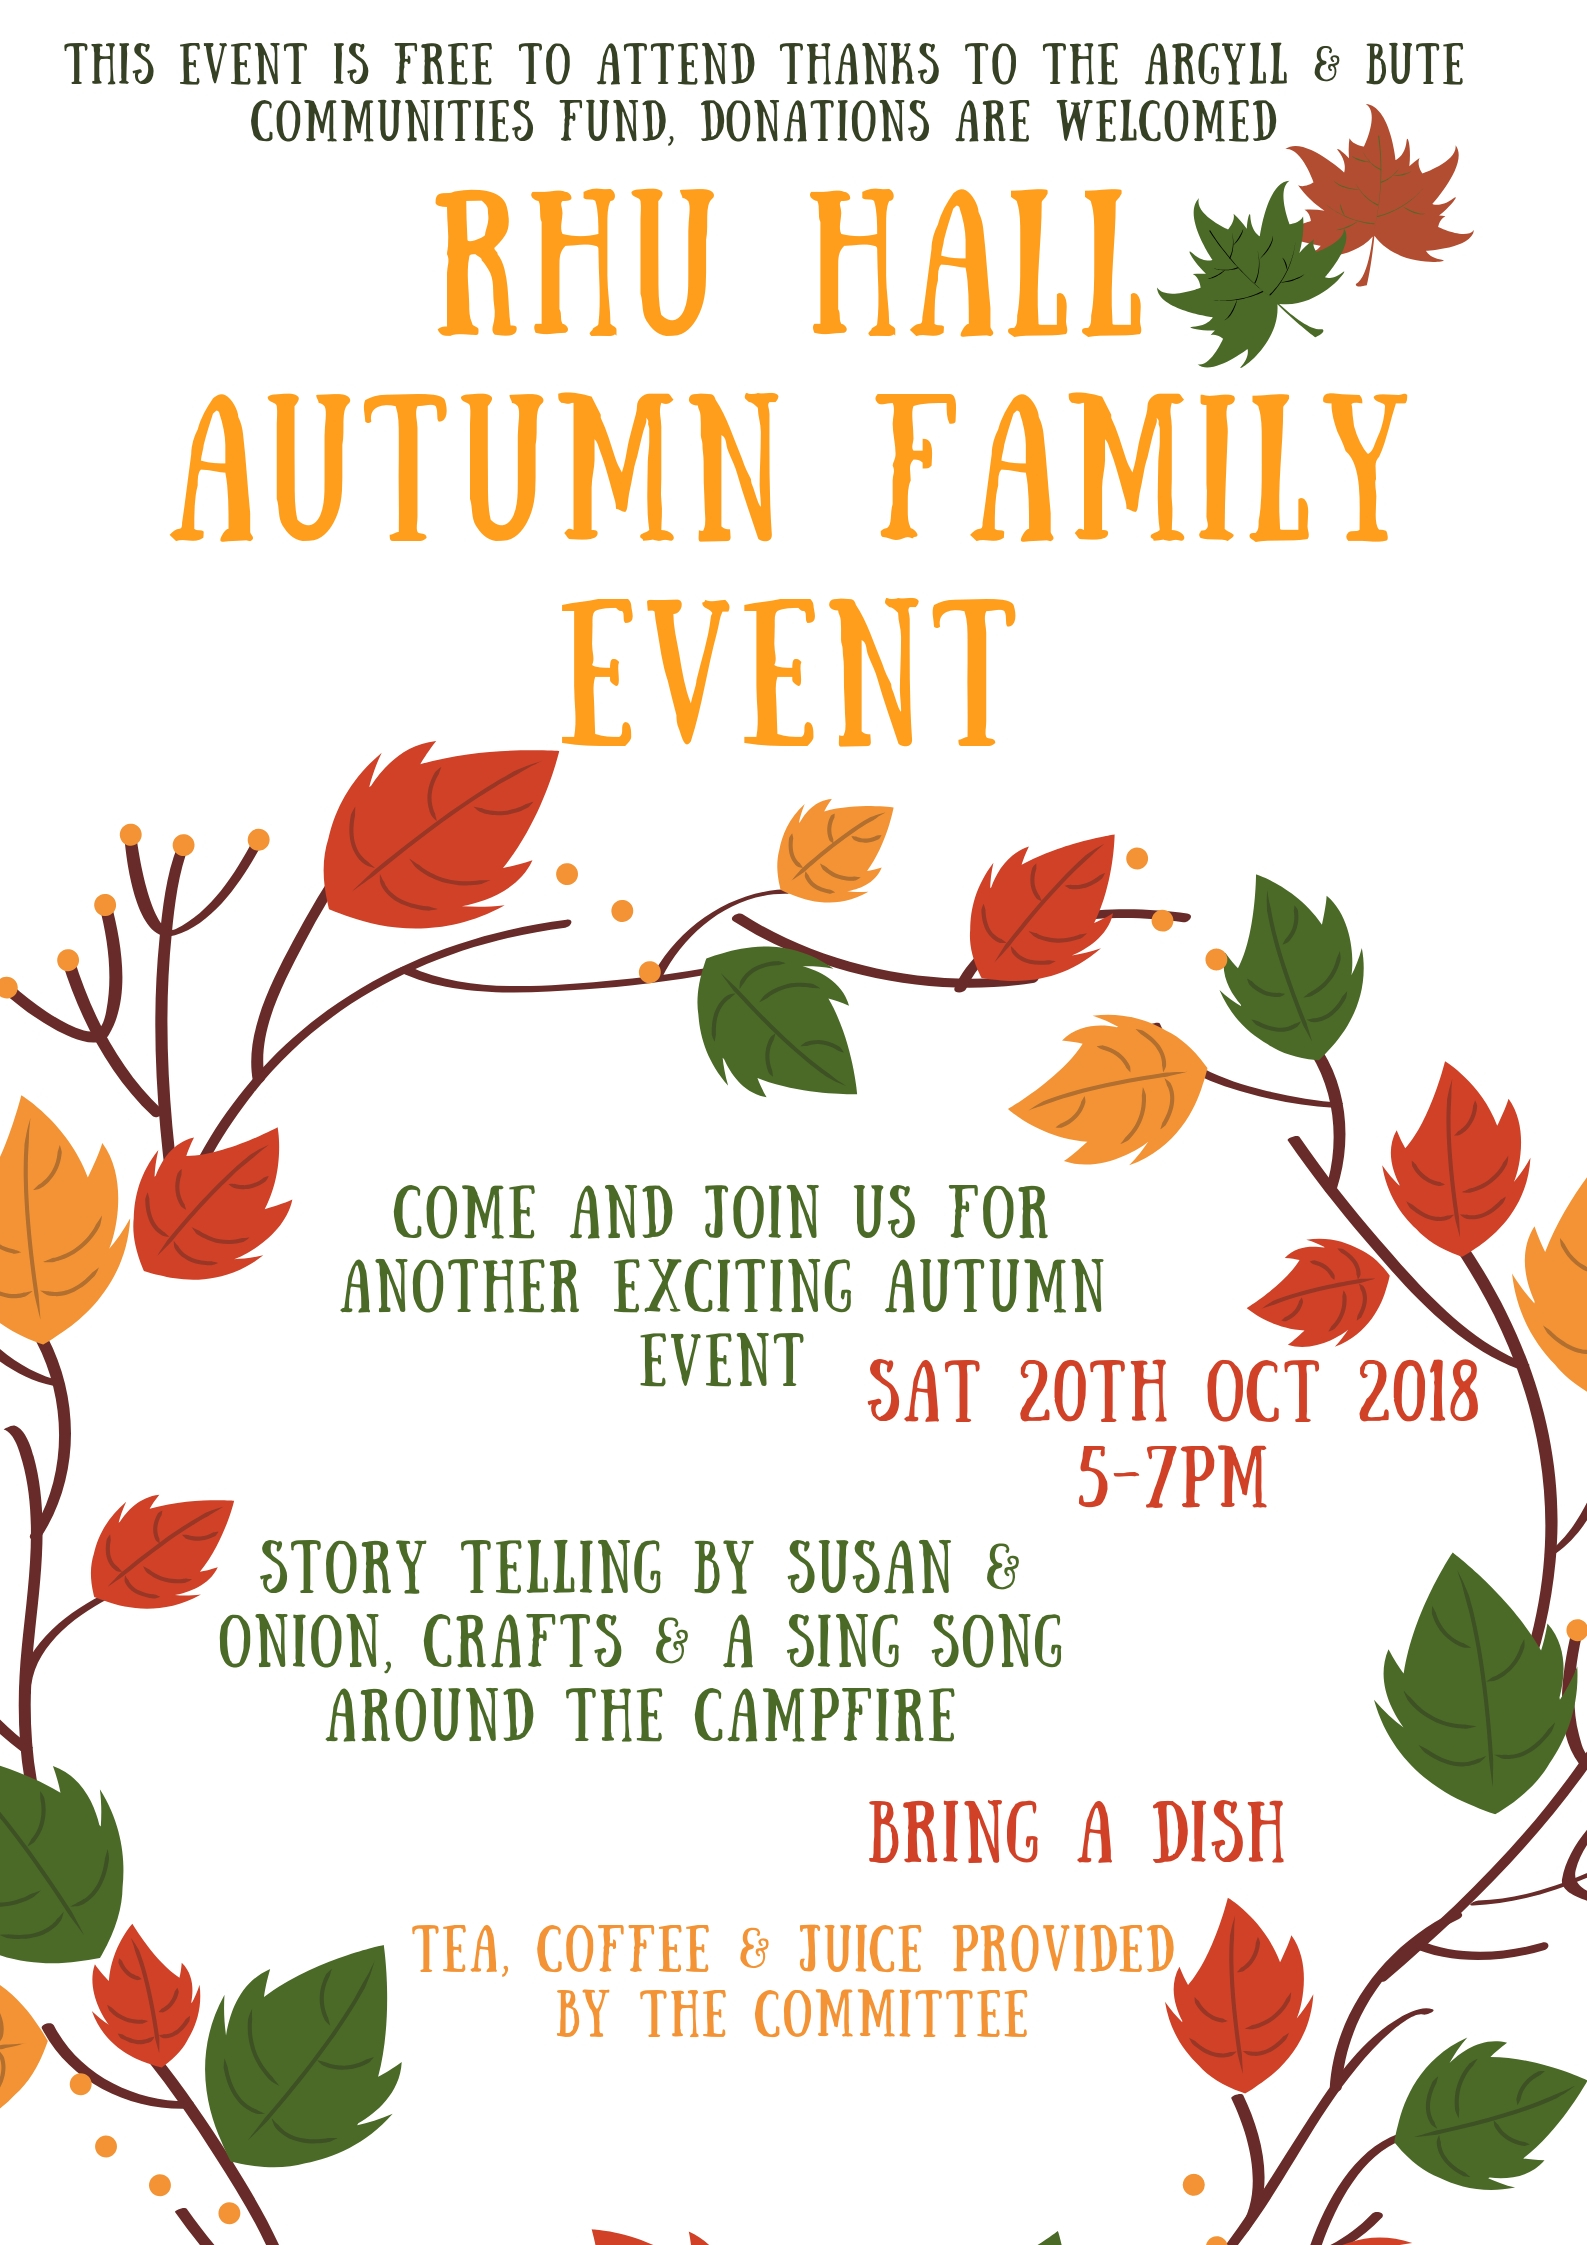 Free autumn family event on Sat October 20th 5-7pm 
Story telling by susan and onon, crafts and singsong